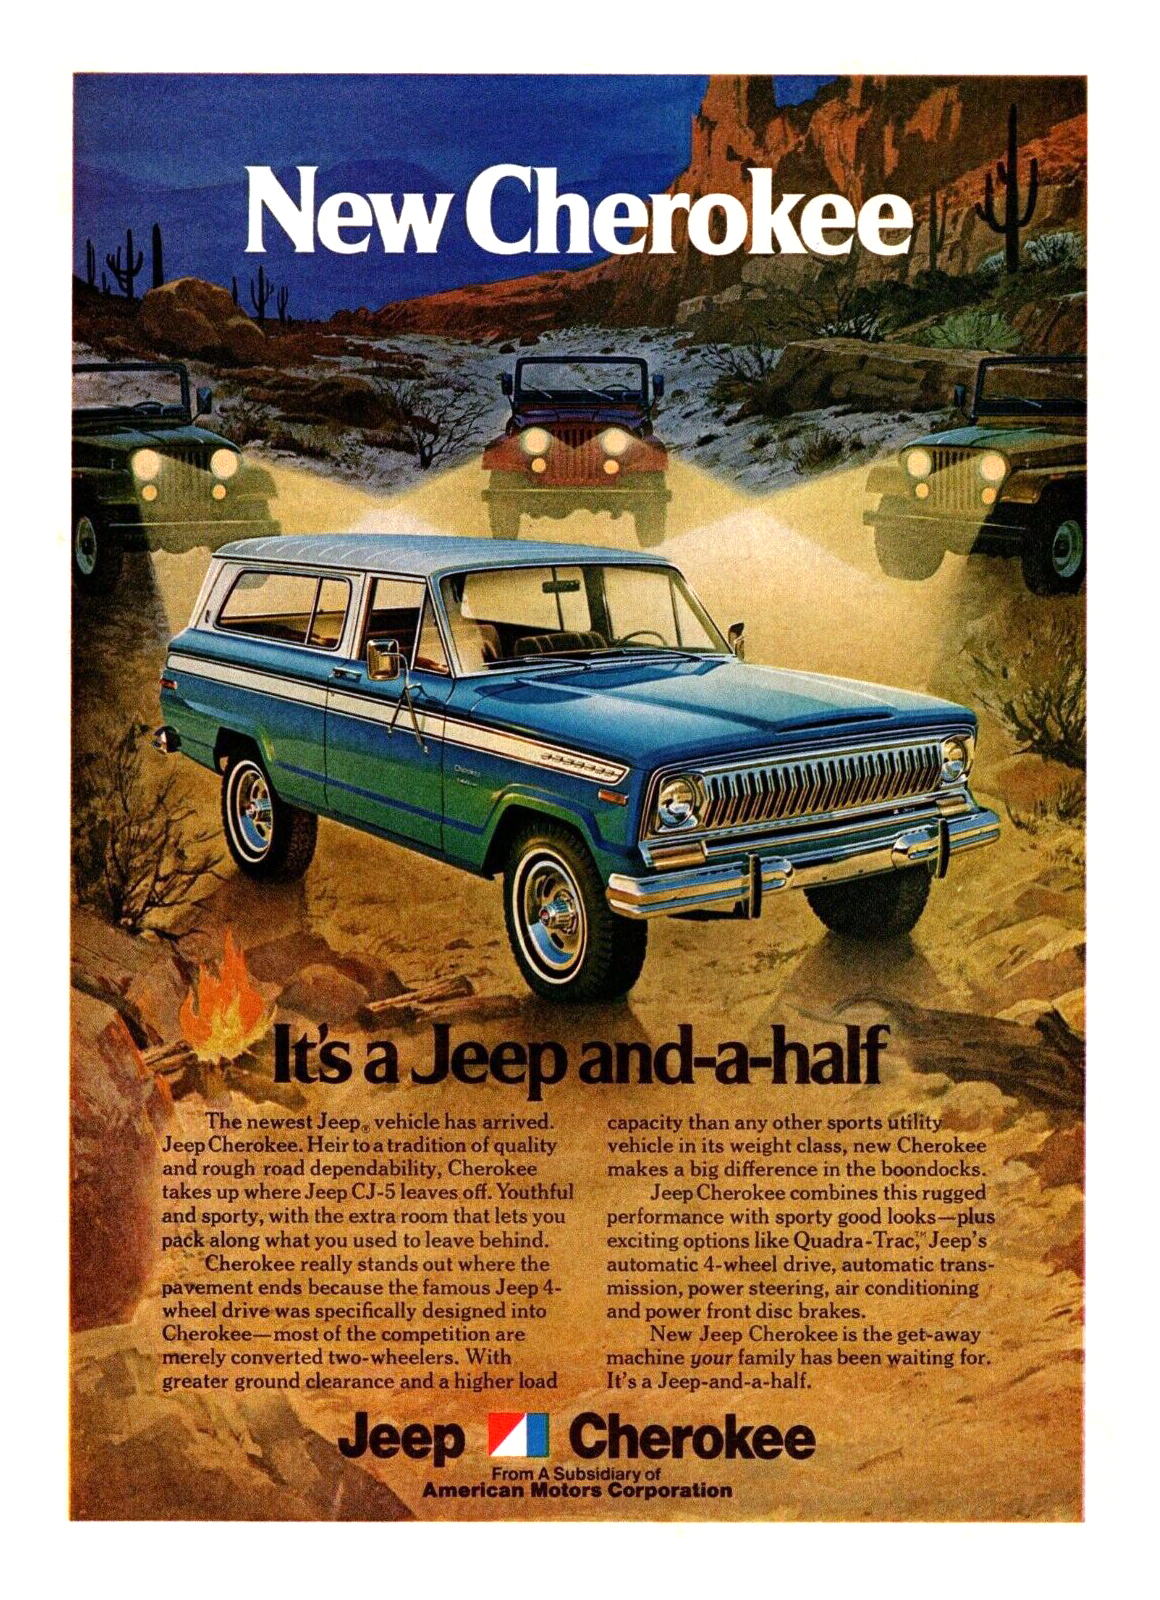 New '74 Jeep Cherokee Ad (September, 1973) – It's a Jeep and-a-half